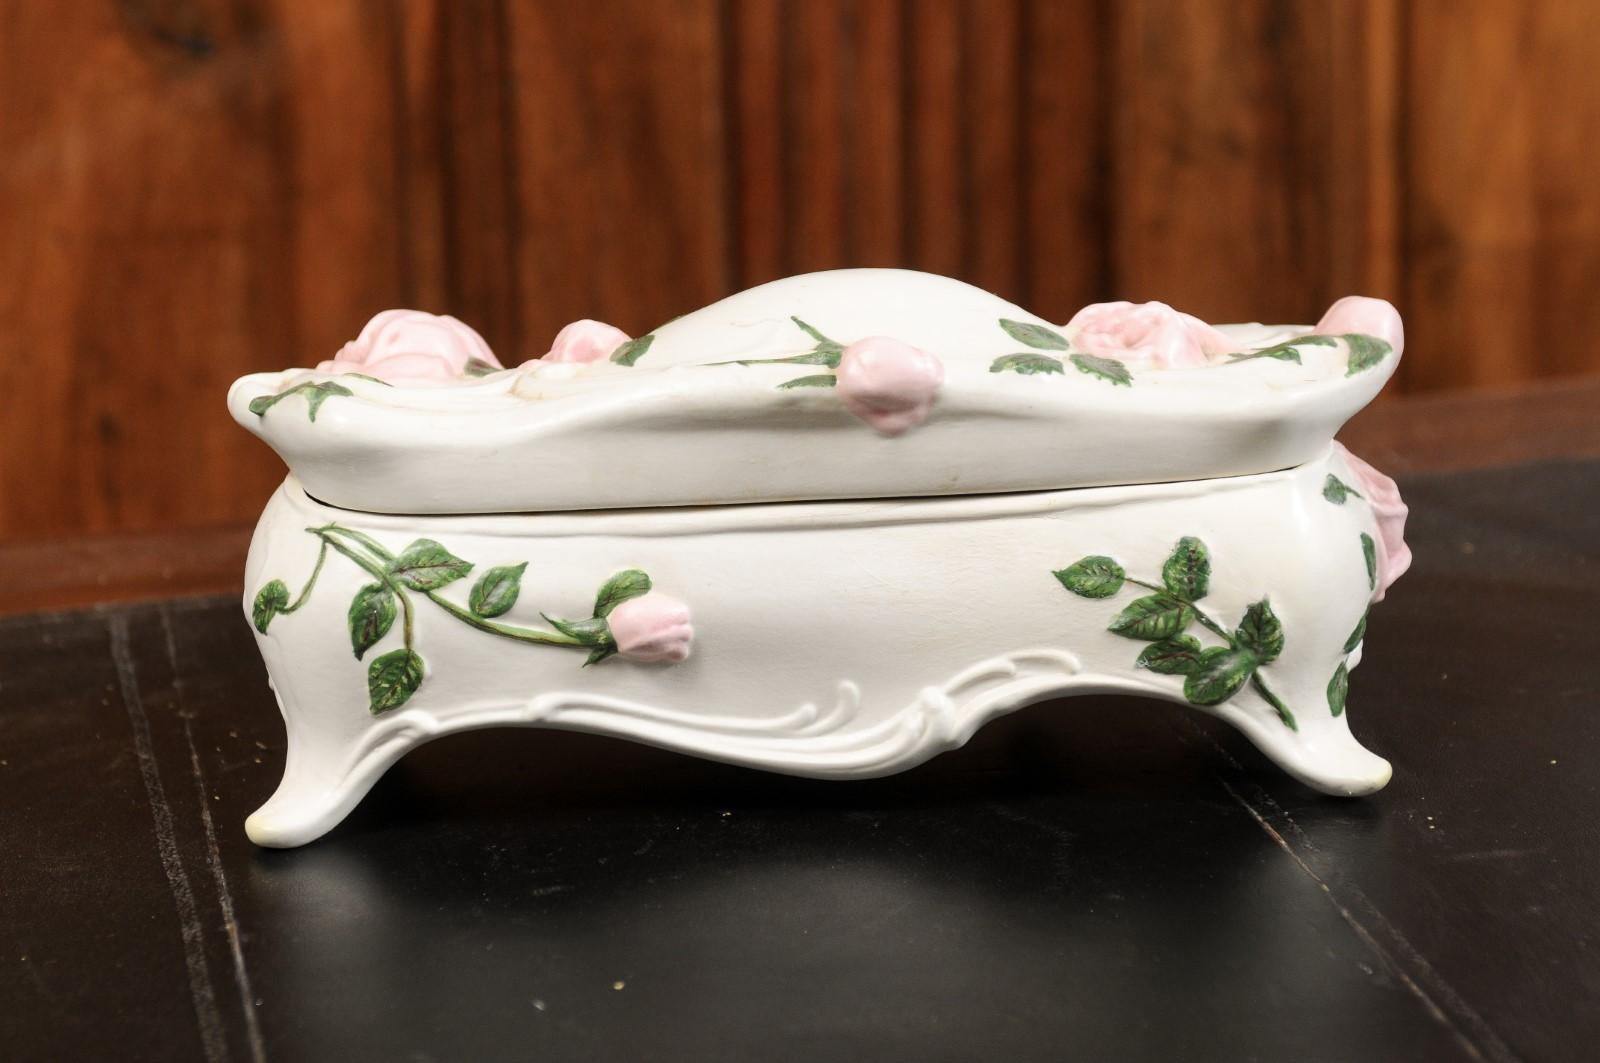 An English porcelain vanity box from the 20th century, with painted roses and lid. Created in England, this porcelain vanity box features sinuous Rococo style lines perfectly accented with pink roses and green foliage, standing out beautifully on a